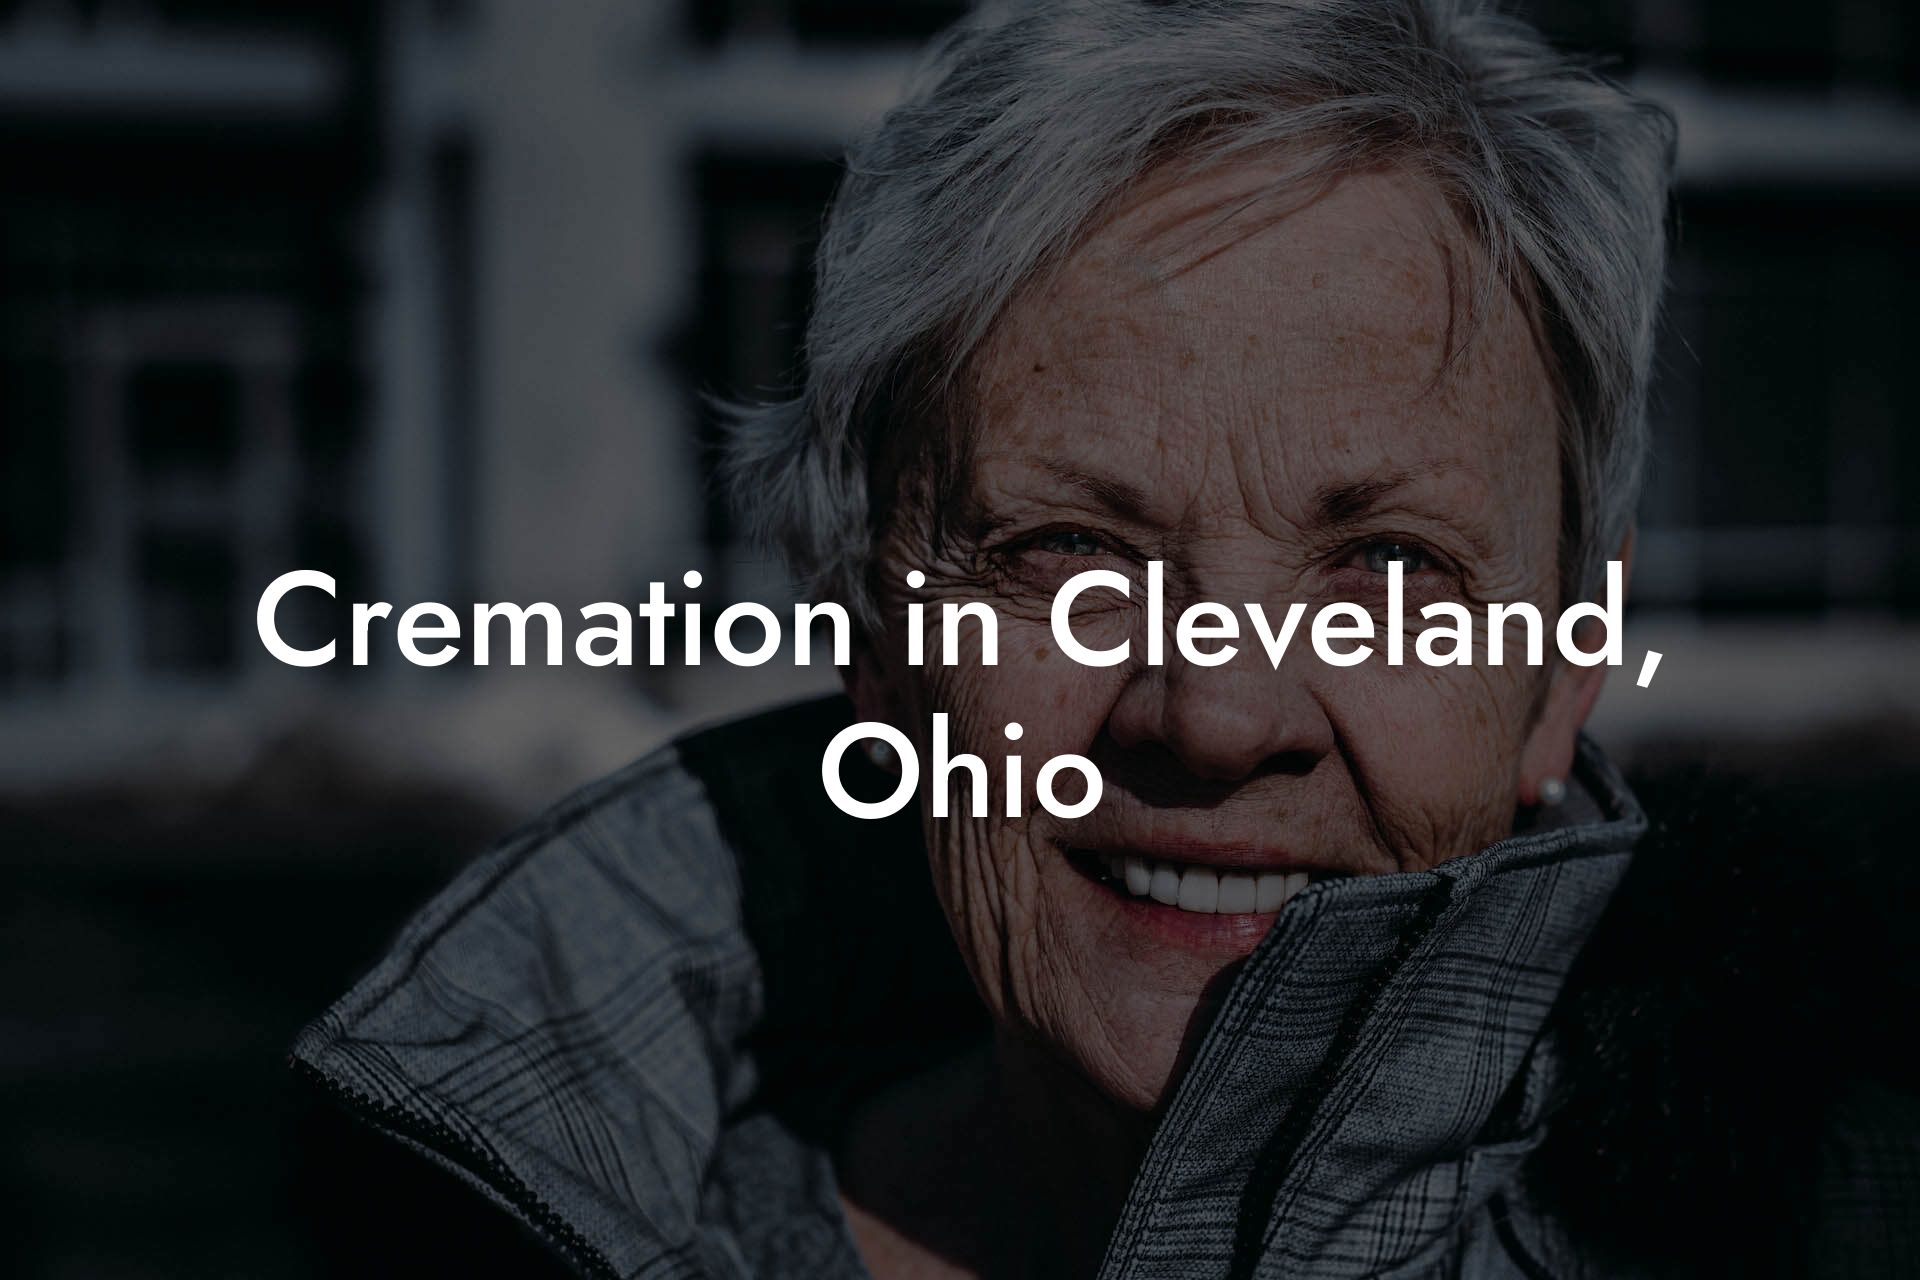 Cremation in Cleveland, Ohio